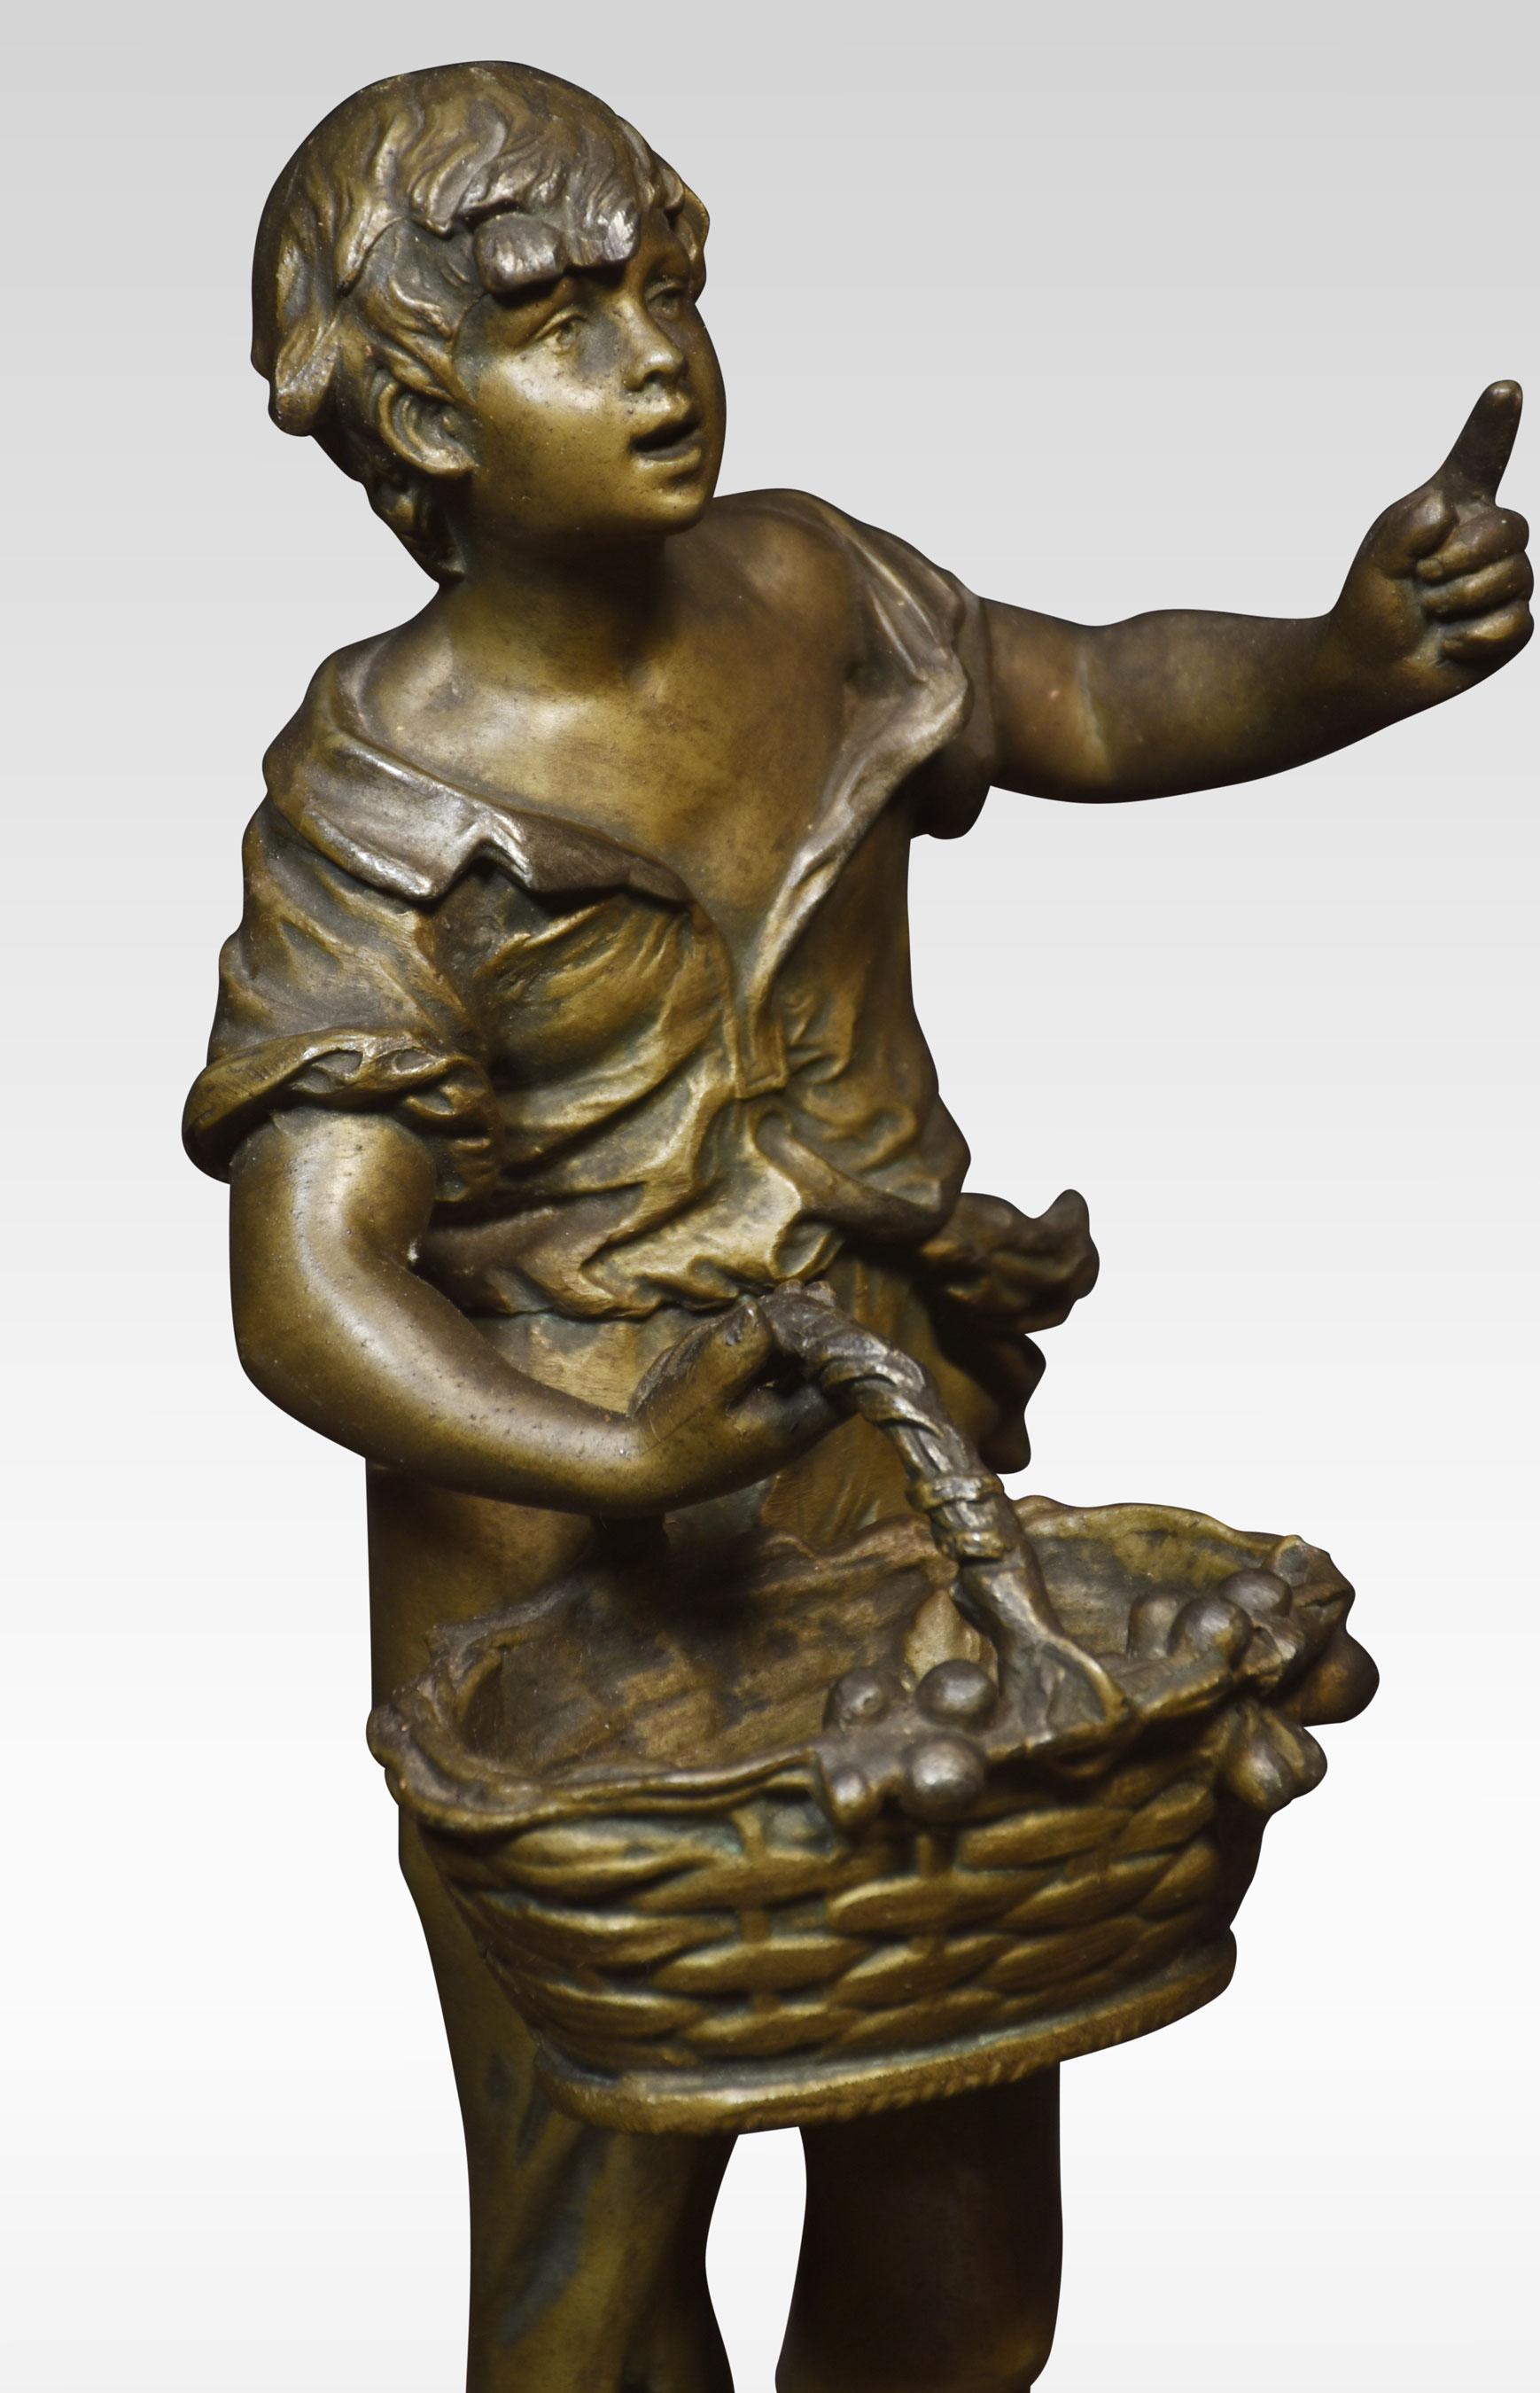 Pair Of French Spelter Figures, depicting a boy and girl selling fruit, raised up on circular stepped bases.
Dimensions
Height 11 Inches
Width 5.5 Inches
Depth 5.5 Inches